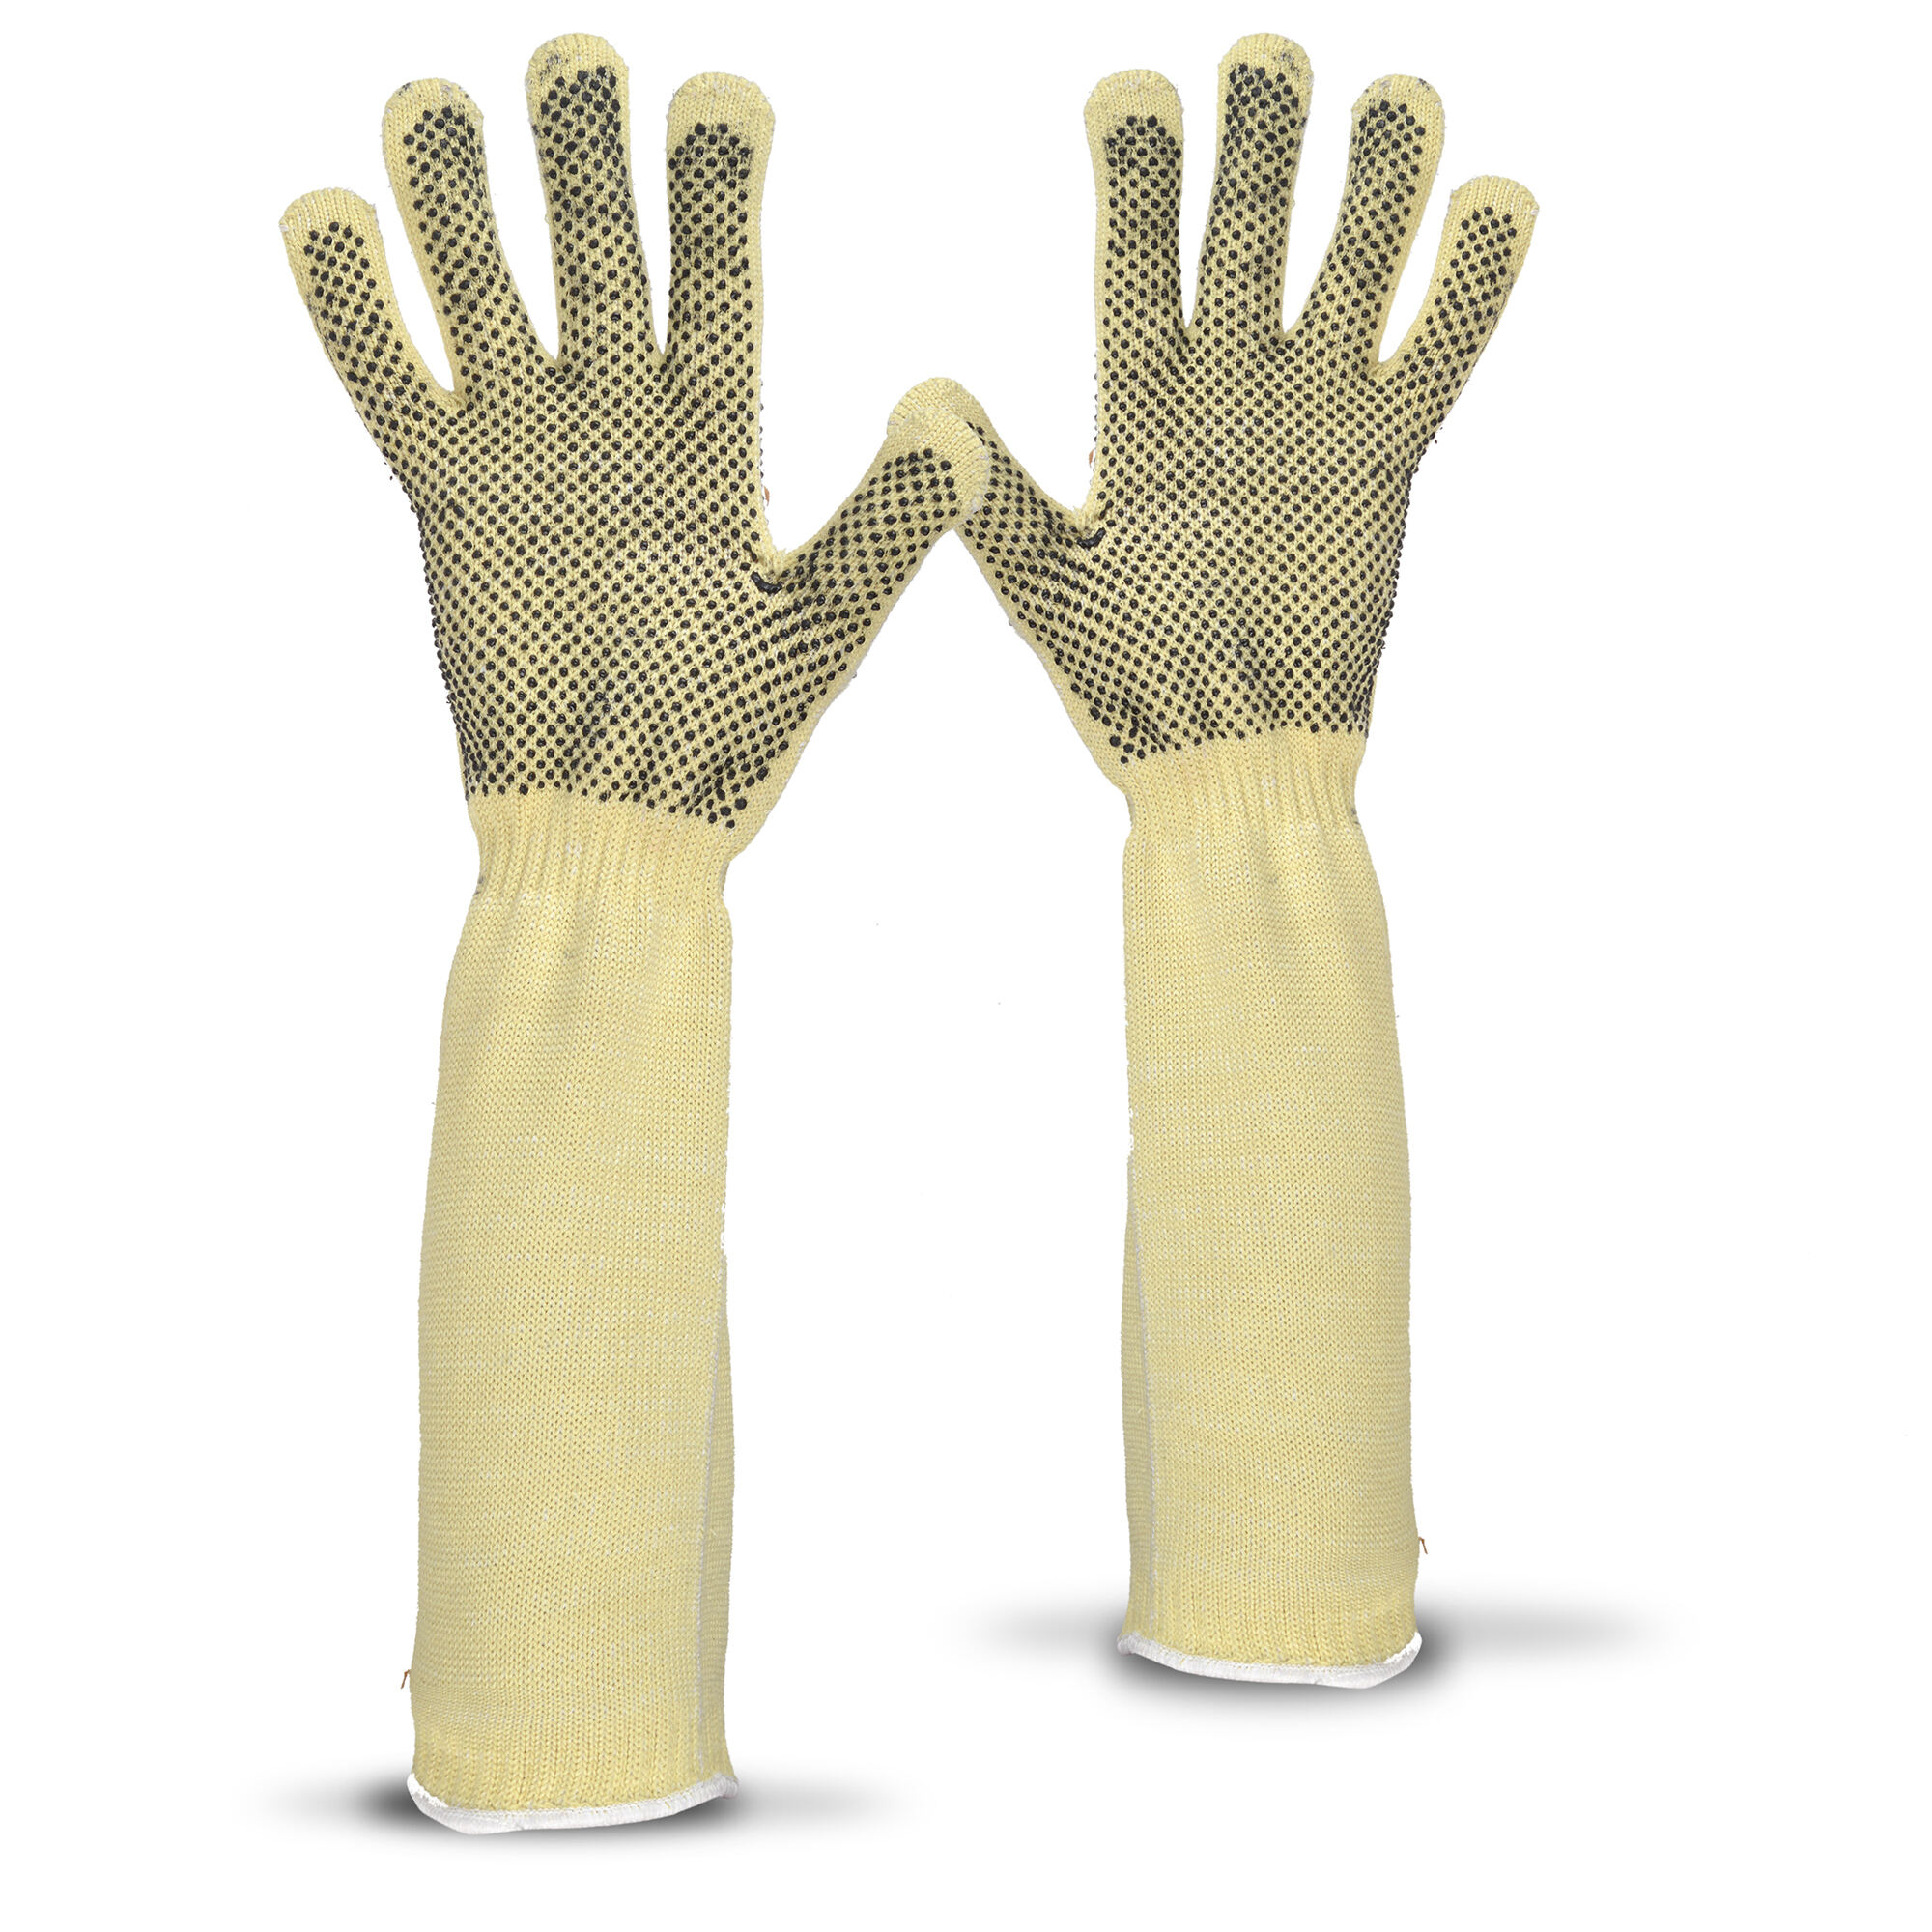 PIP Kut-Gard Polyester-Wrapped Stainless Steel Core Cut-Resistant Gloves,  Quantity: Case of 24